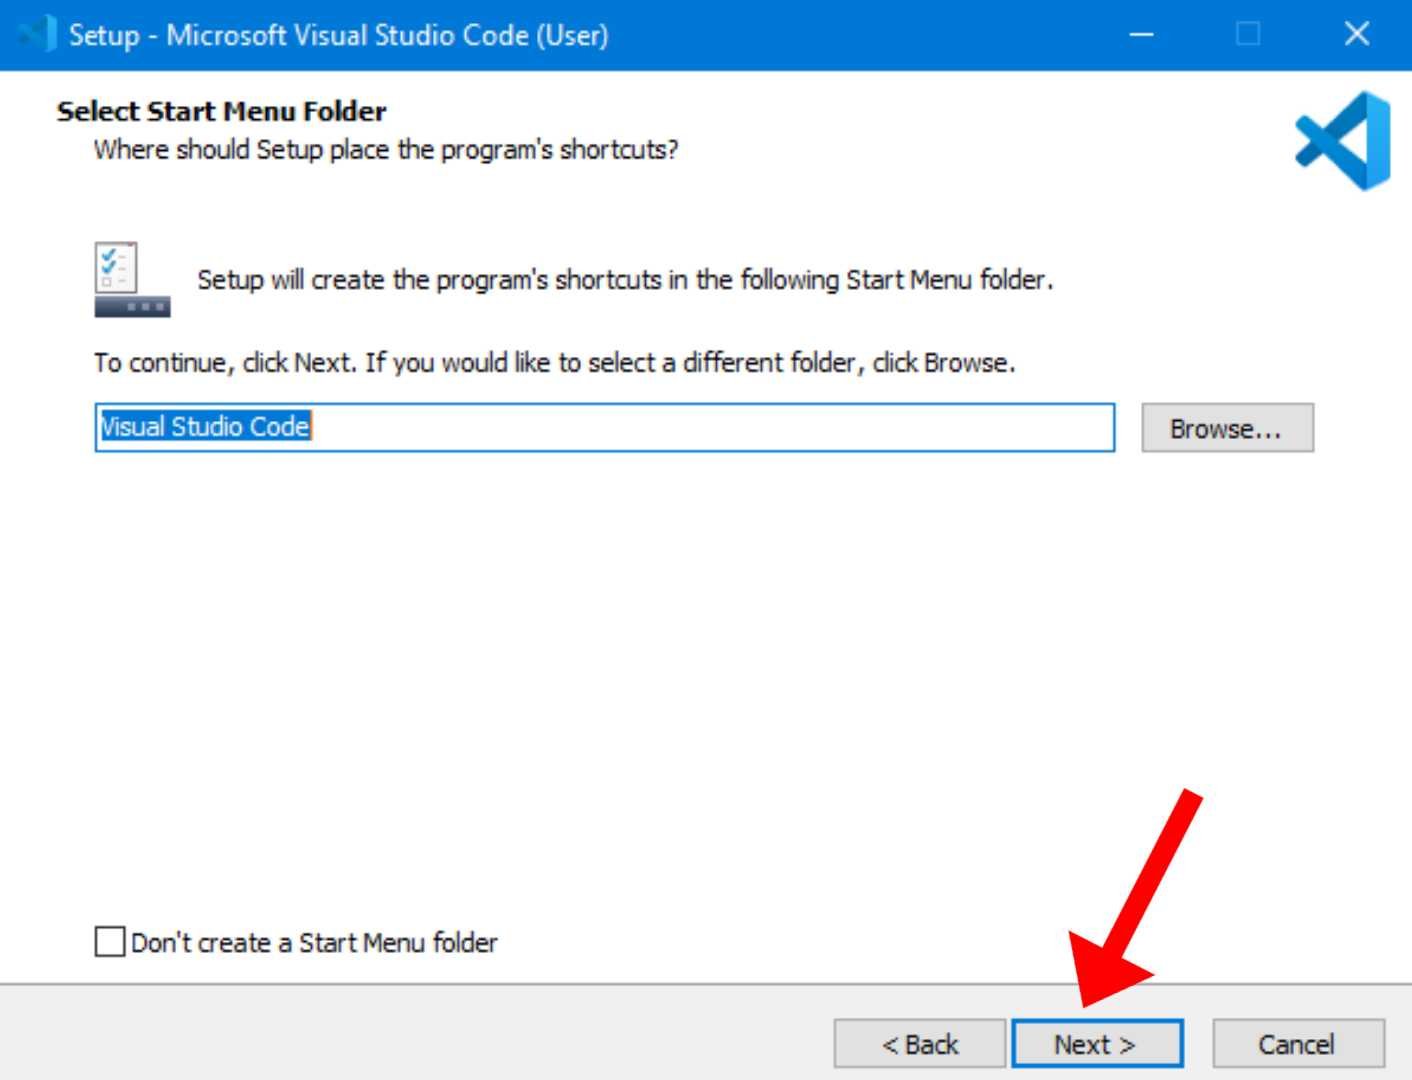 How to download and install Visual Studio Code on Windows 10 ?